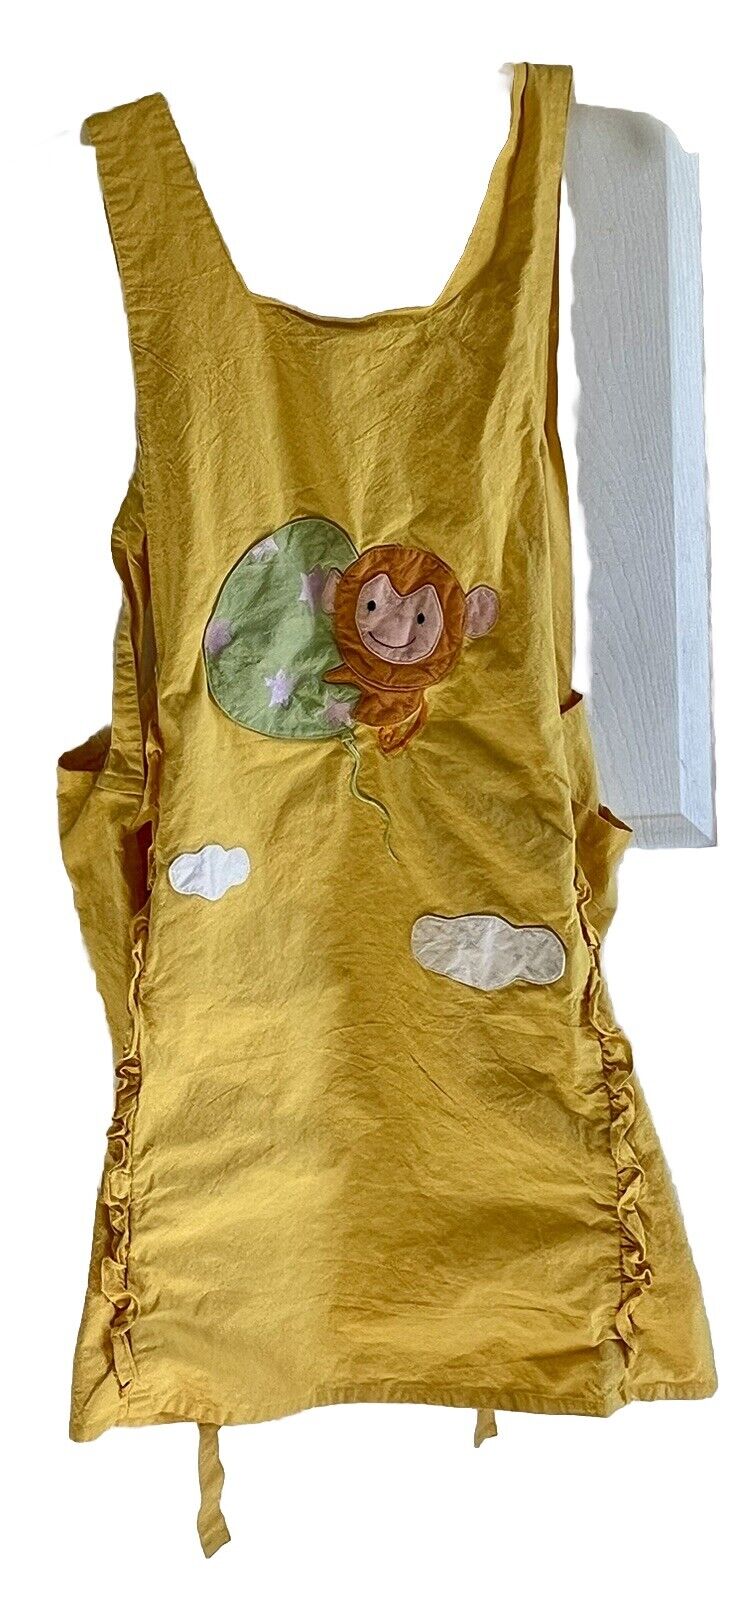 Adorable Yellow Apron Monkey Balloon By Kashmir With Hook & Loop & Tie Closures